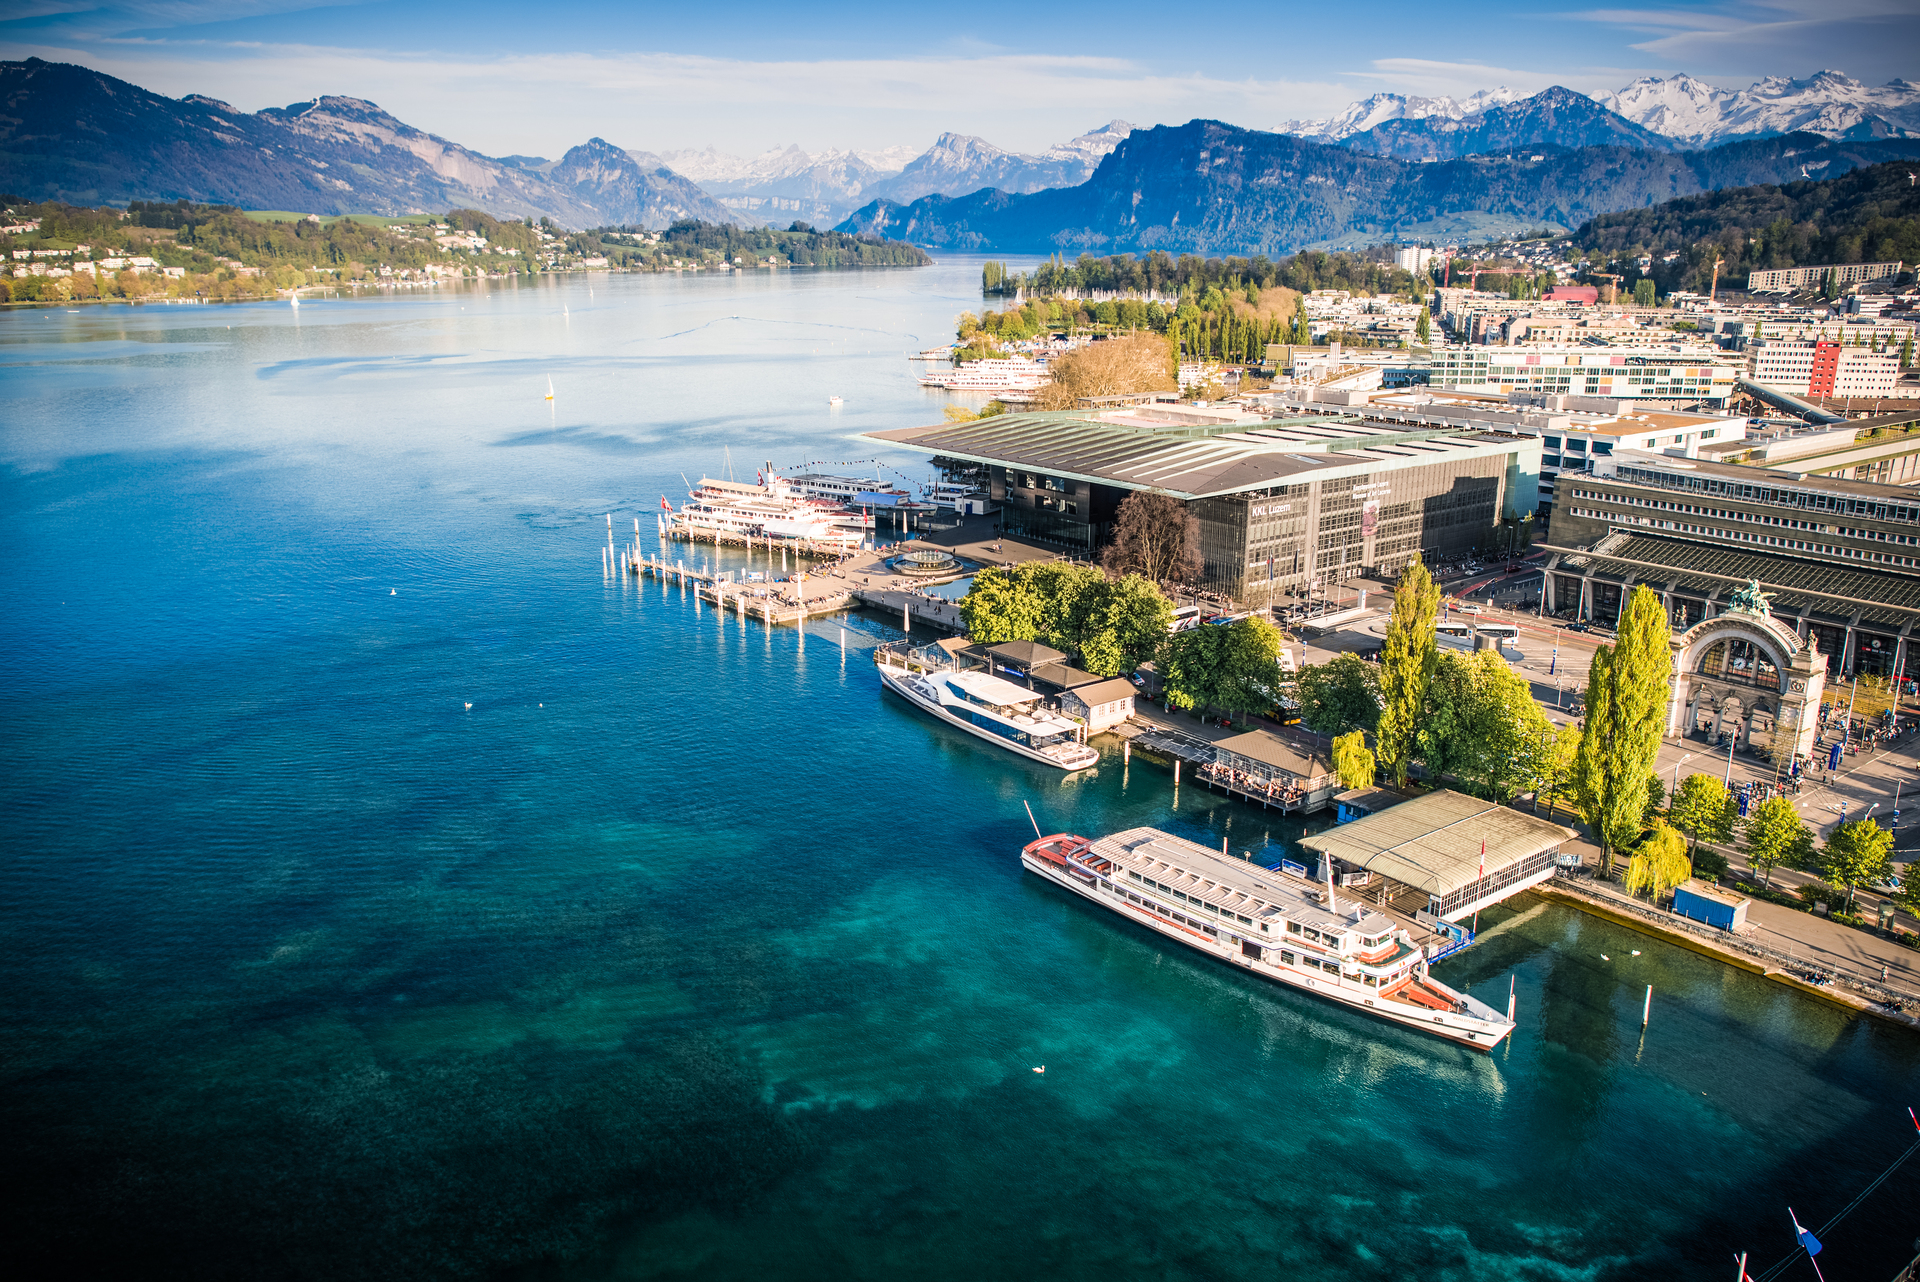 The KKL Luzern is located right next to the Train Station and on the shores of Lake Lucerne.